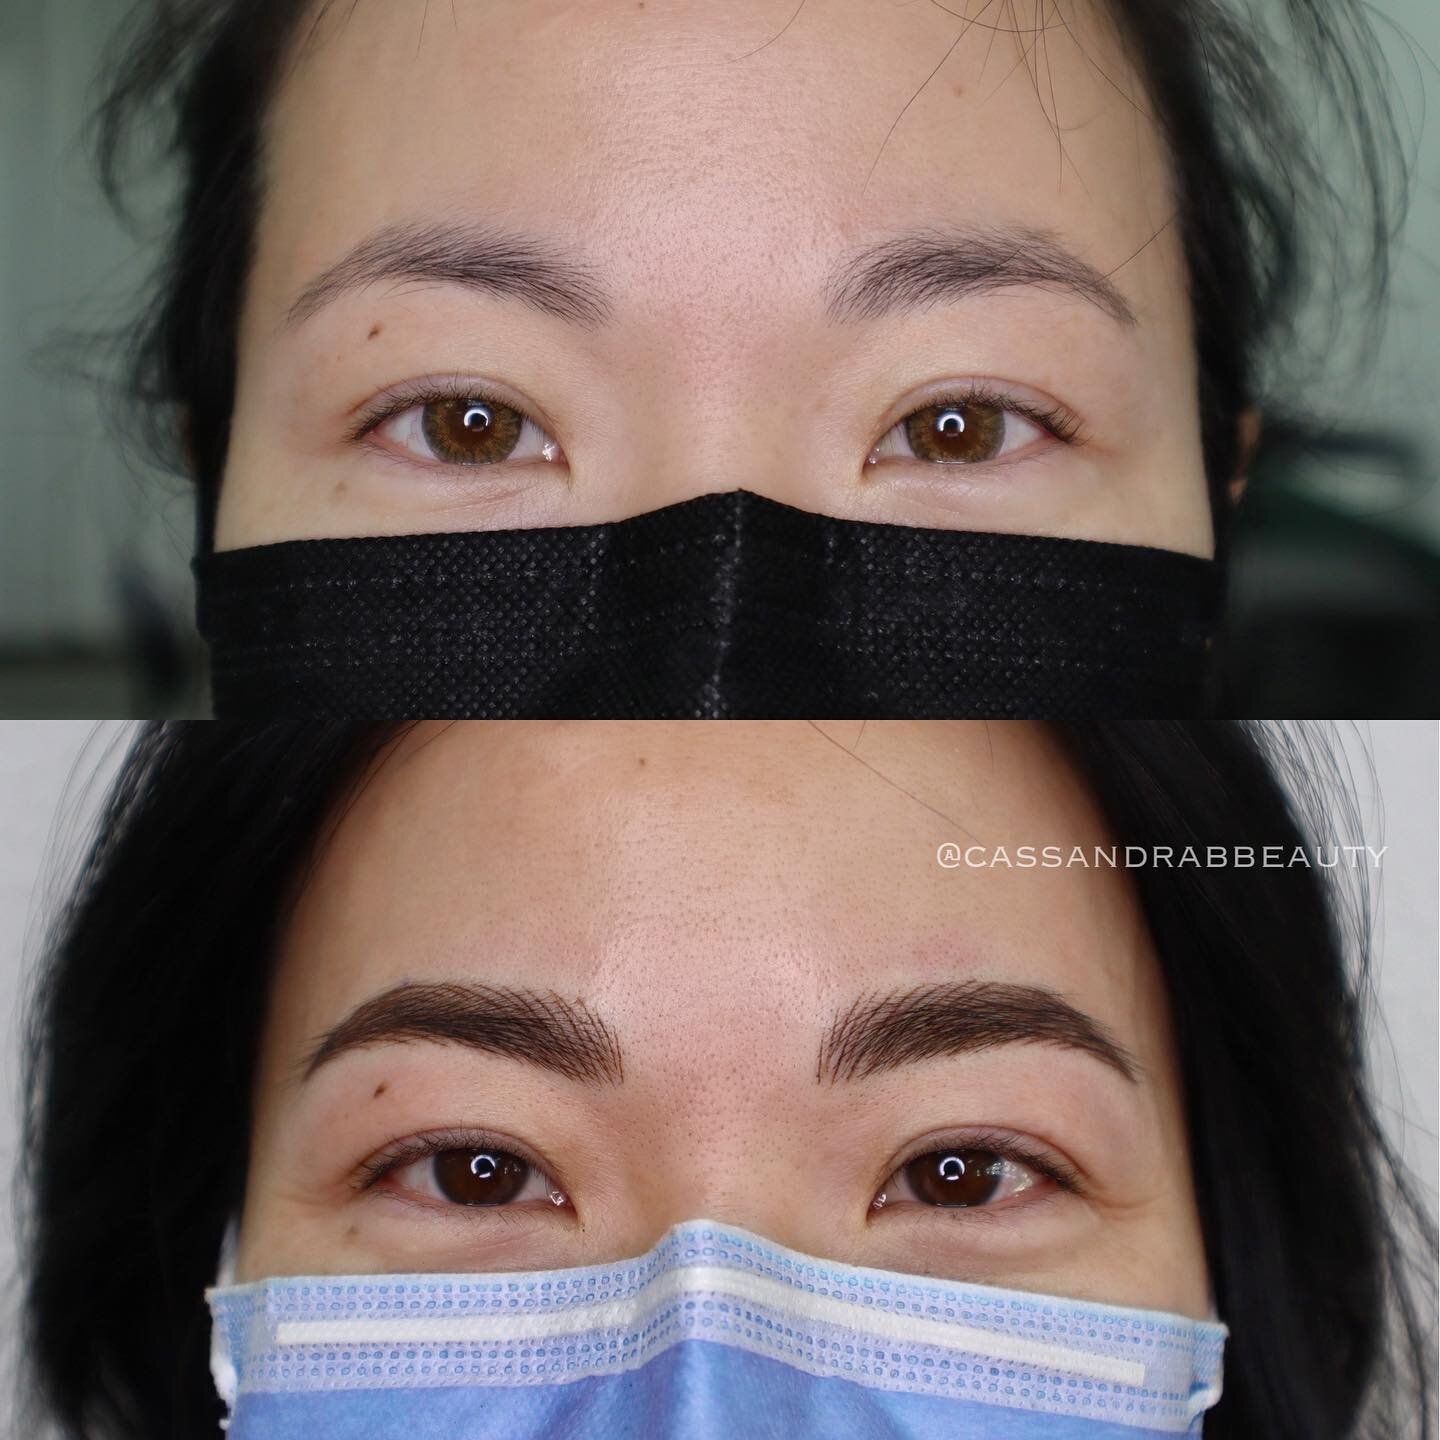 As promised, Nano Brow #beforeandafter from my reel a few posts back 🪄 (post-touch up session). Nano has quickly become my absolute fav brow service yet! 🖤
-
March is getting booked up quickly!! Act now to have your brows healed and ready for summe